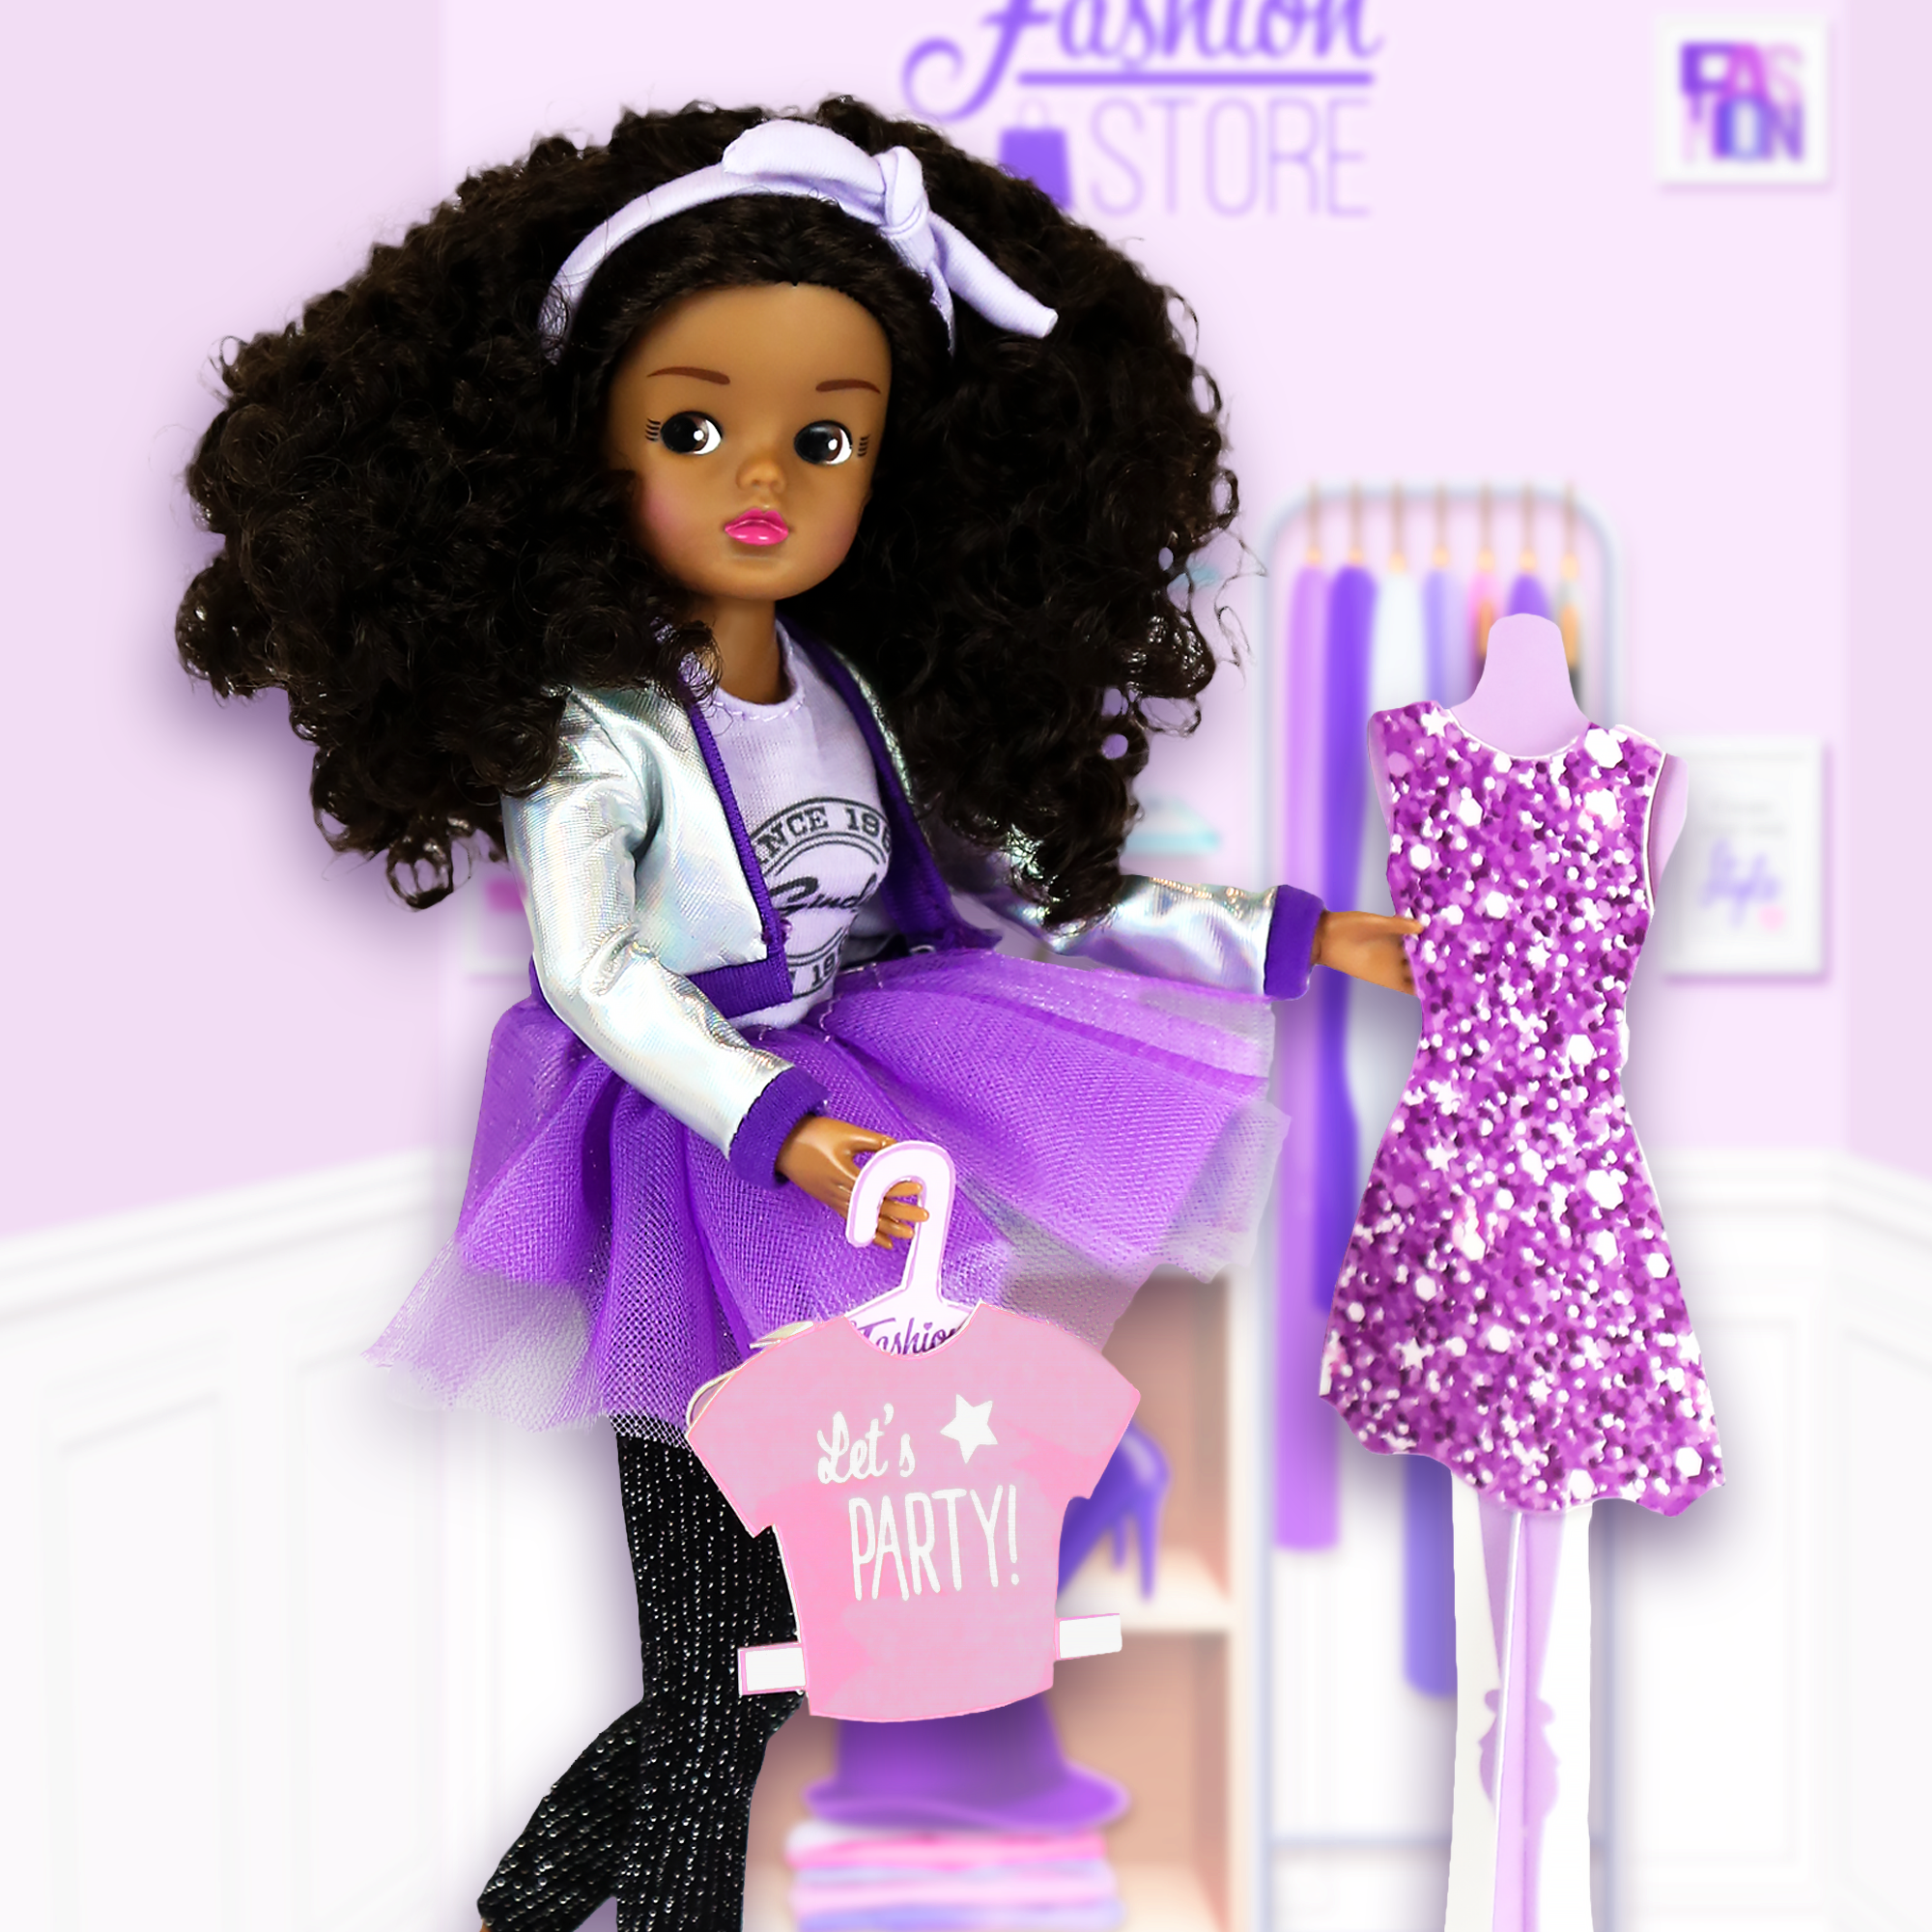 New Sindy dolls playline collection coming in 2021 - YouLoveIt.com